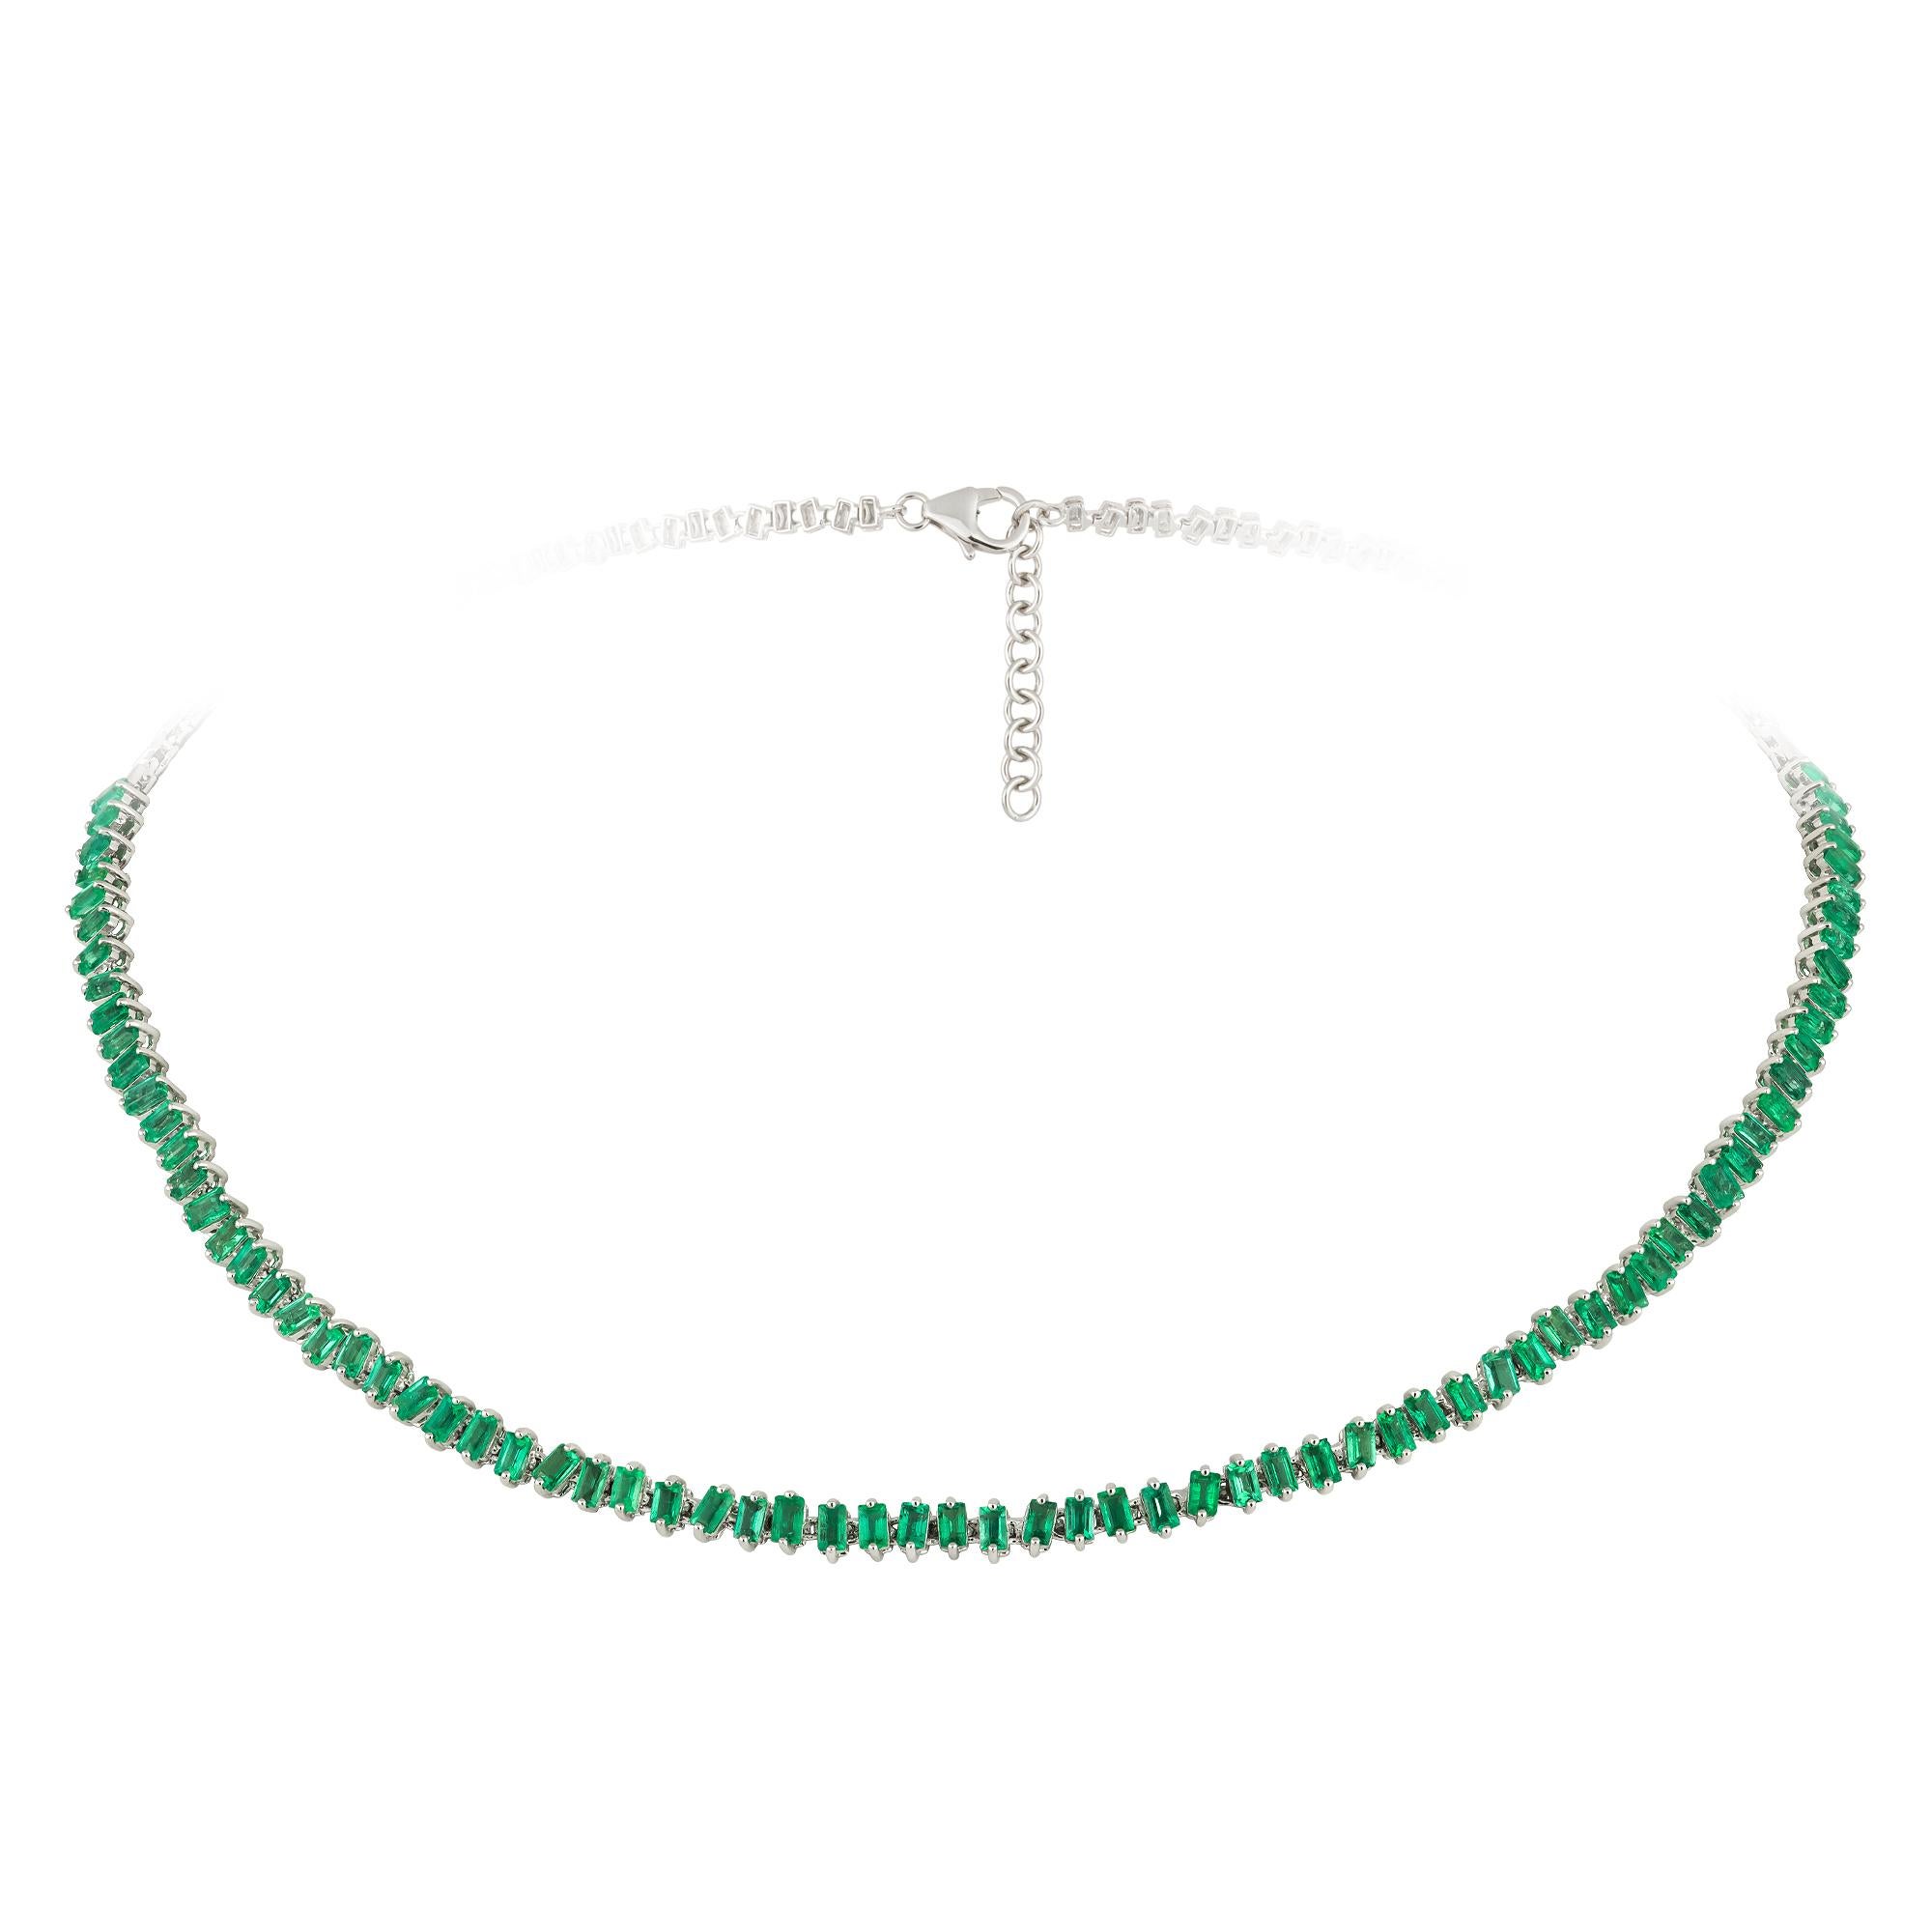 NECKLACE 18K White Gold 
Emerald 6.08 Cts/76 Pcs

With a heritage of ancient fine Swiss jewelry traditions, NATKINA is a Geneva based jewellery brand, which creates modern jewellery masterpieces suitable for every day life.
It is our honour to